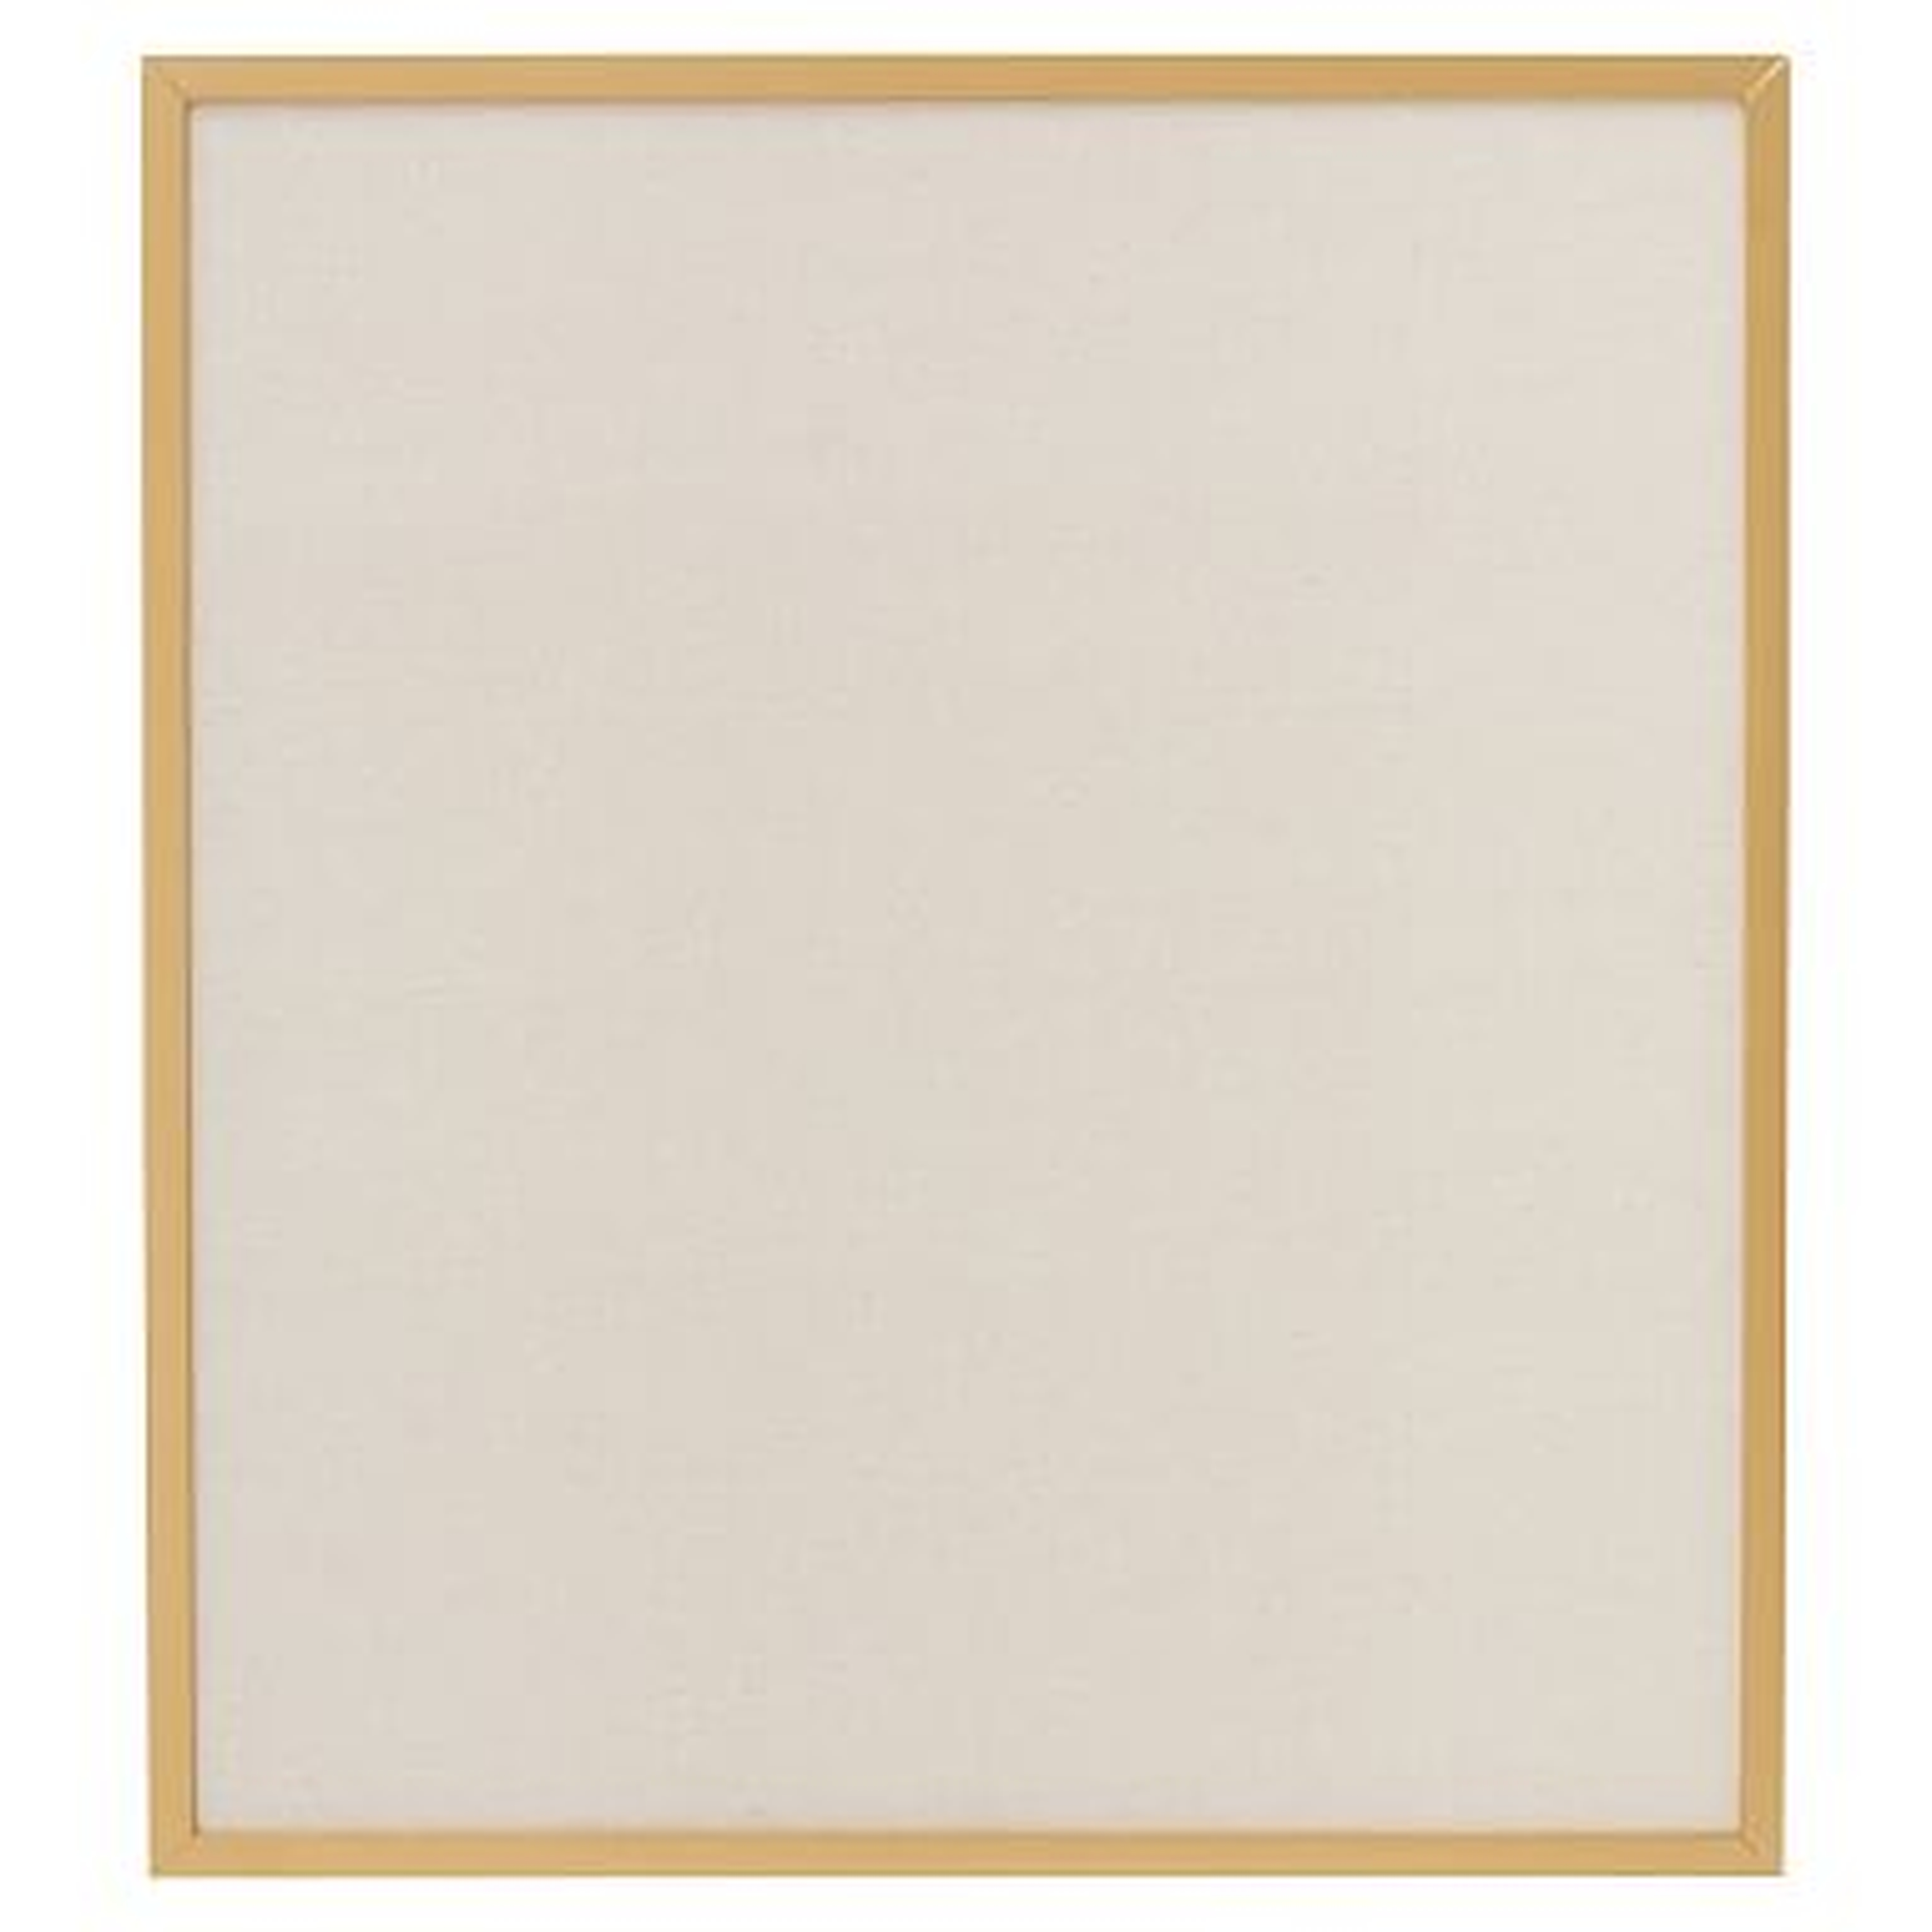 No Nails Oversized Framed Pinboard, 36"x40", Gold - Pottery Barn Teen